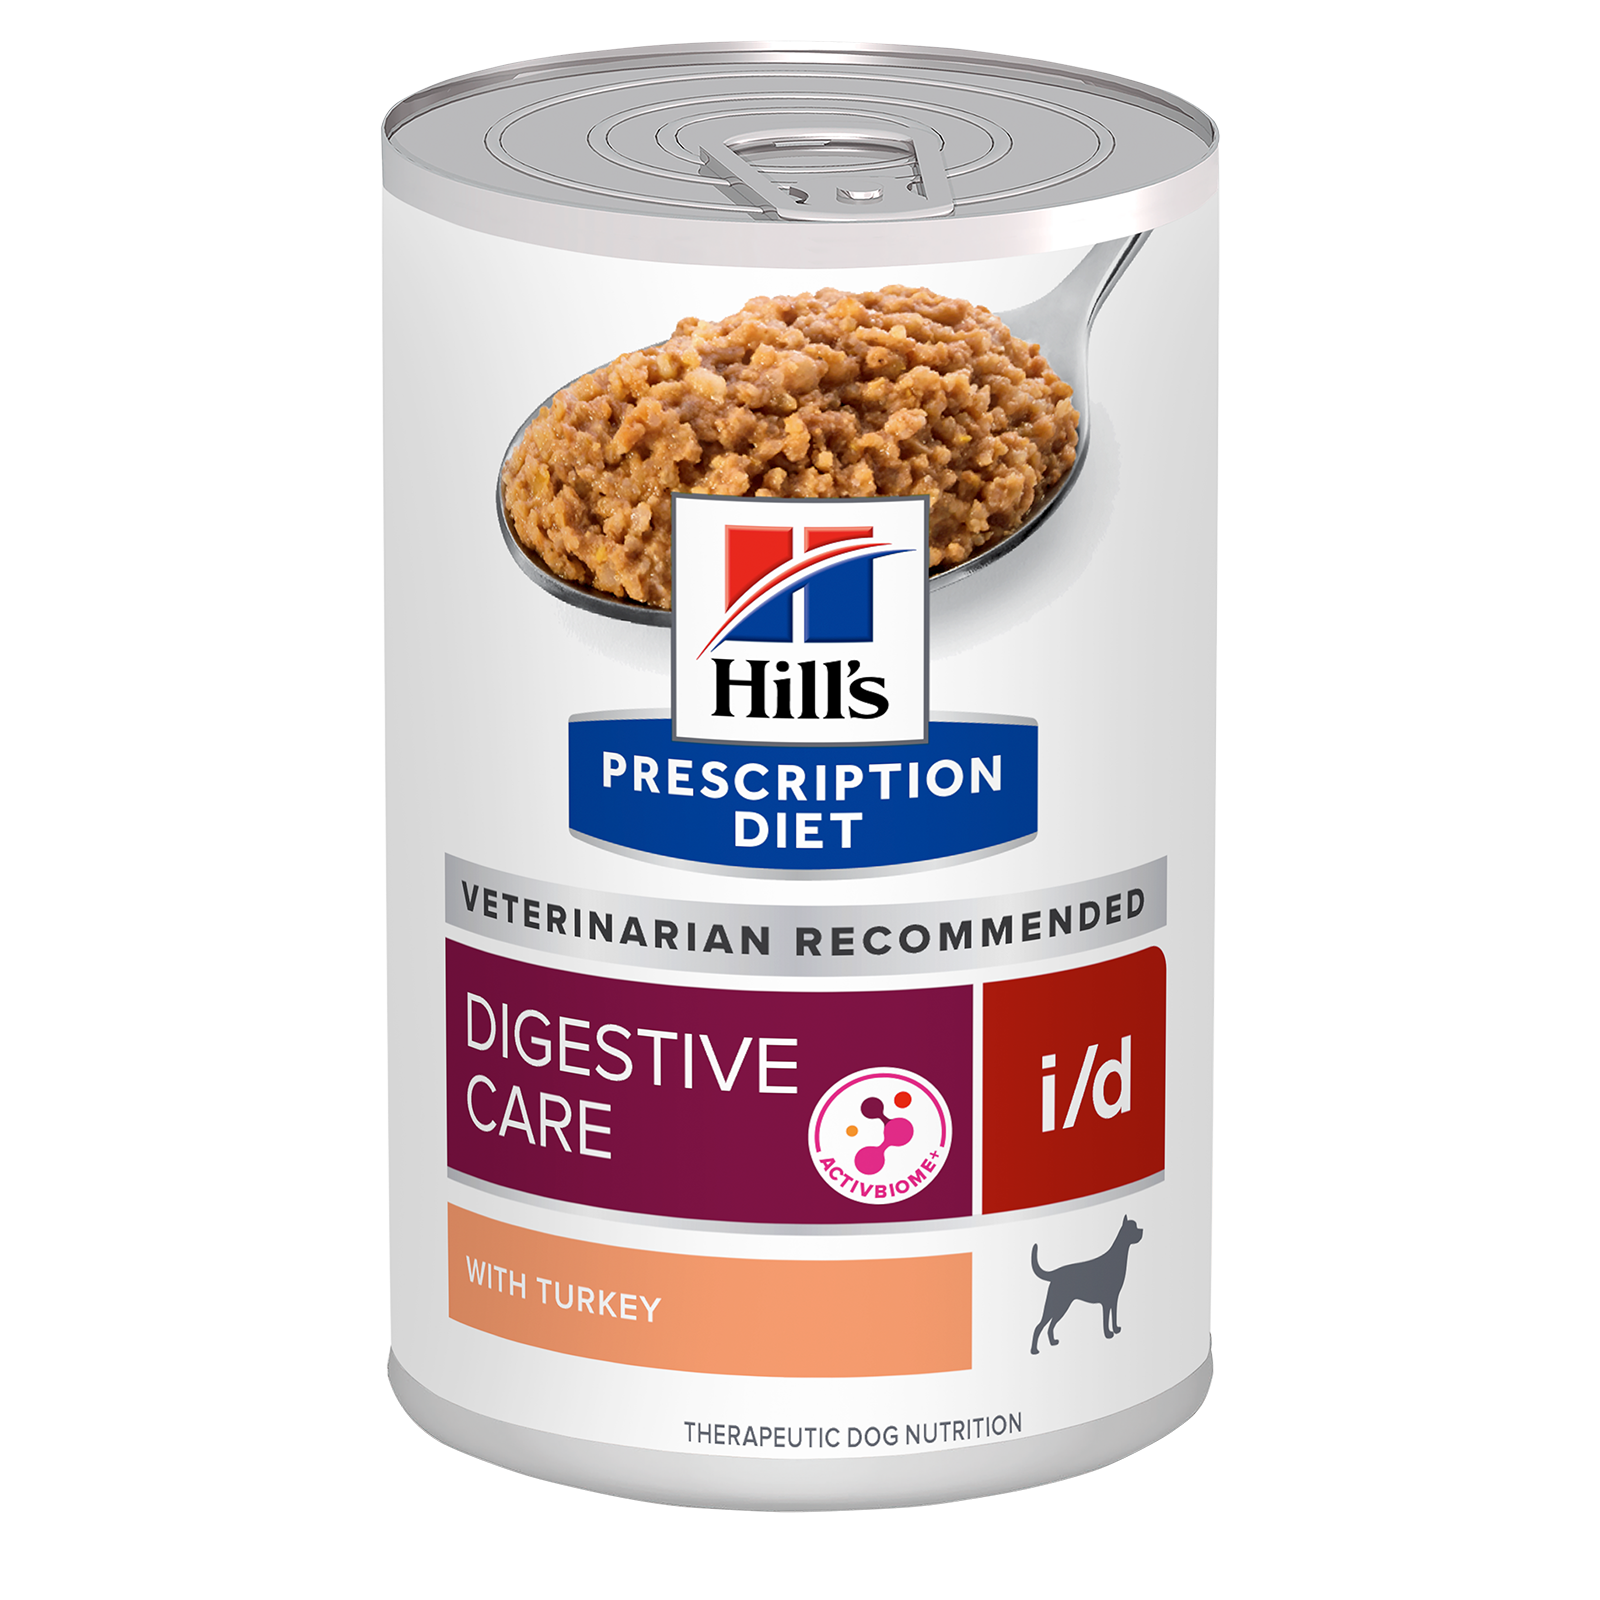 Hill's Prescription Diet Dog Food Can i/d Digestive Care with Turkey